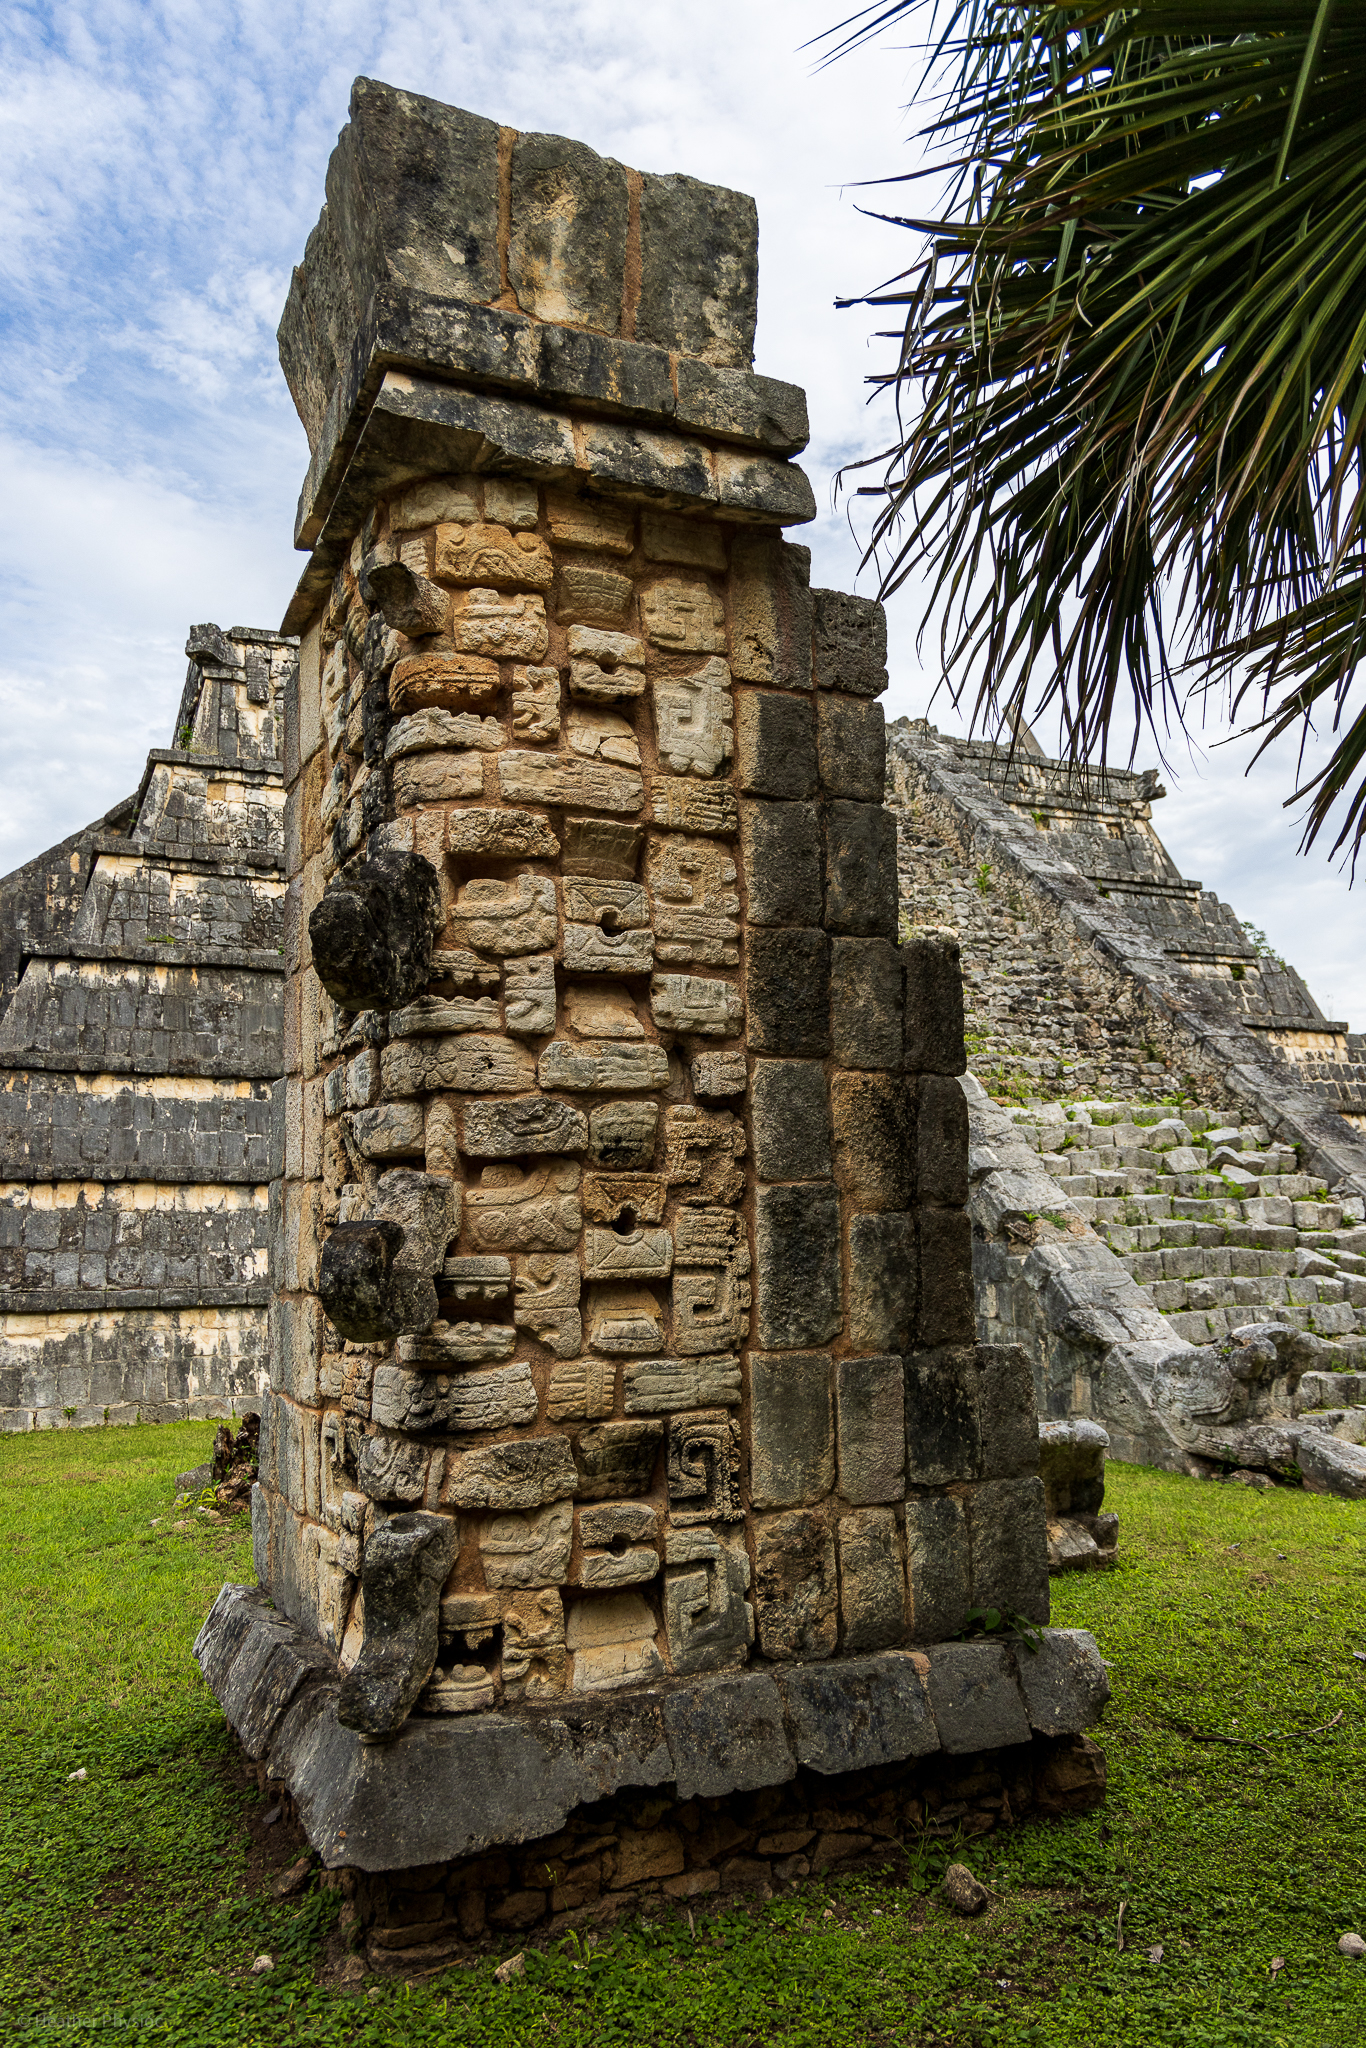 A detailed stone pillar with elaborate carvings, standing in front of the Kukulkan Pyramid at Chichen Itza. The foreground focuses on the intricate Mayan designs and glyphs etched into the rock.